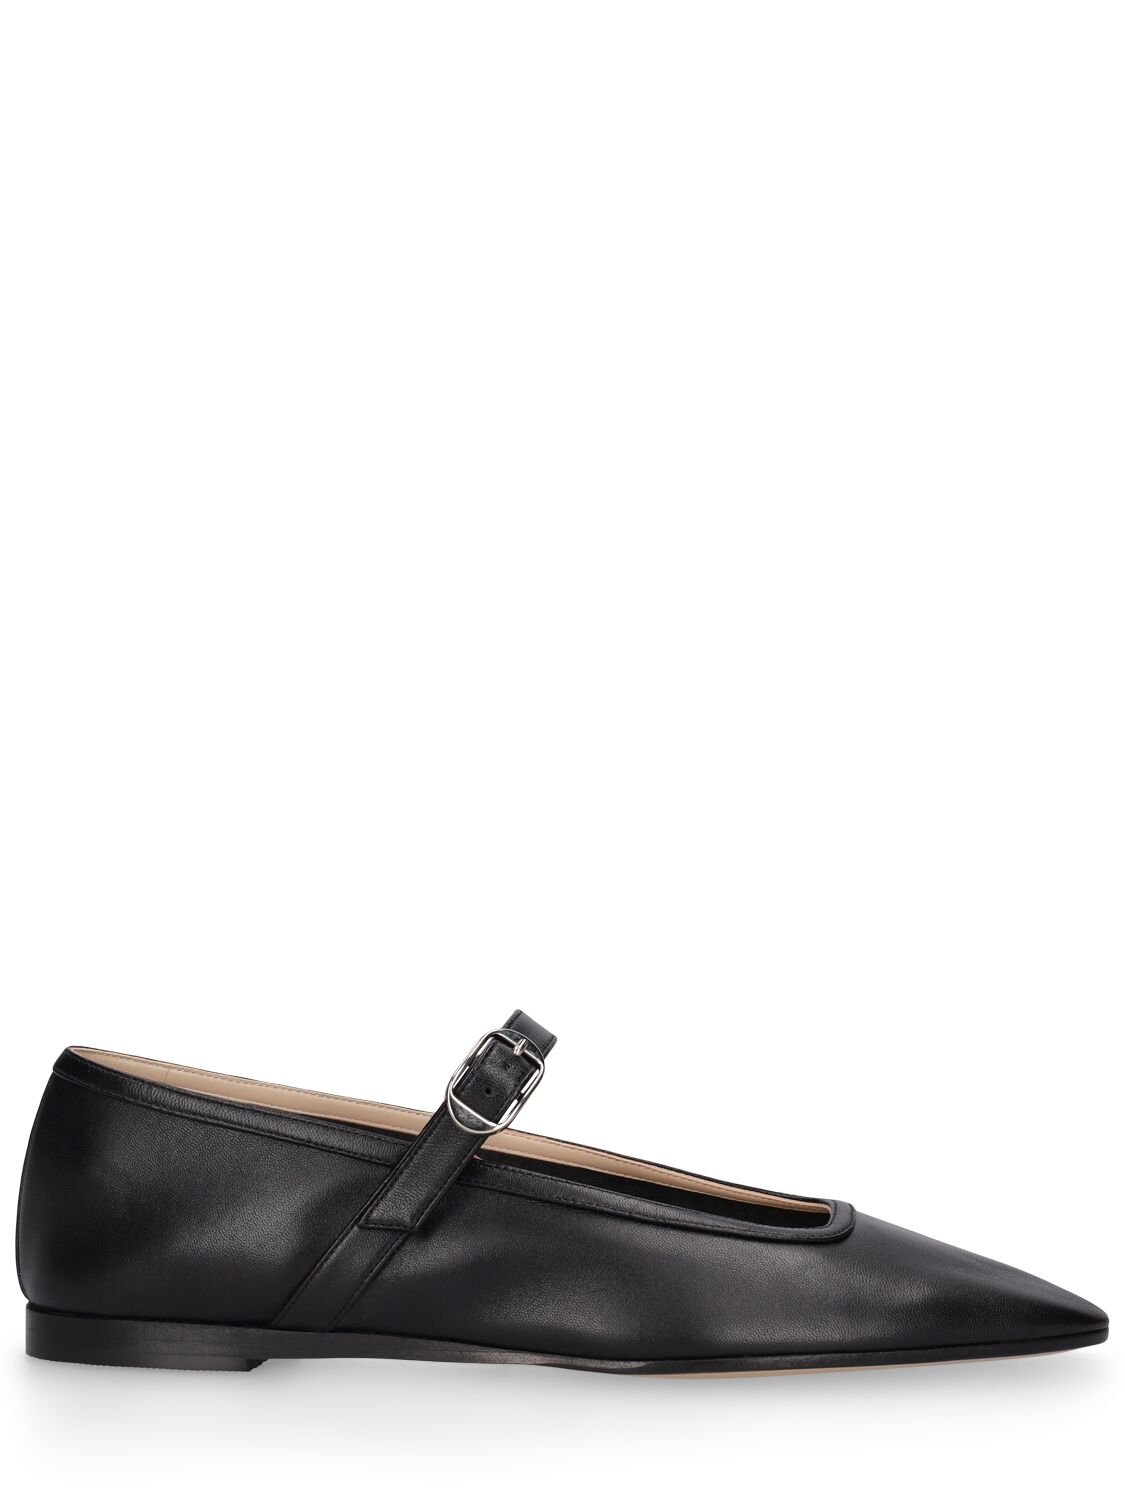 Shop Le Monde Beryl 10mm Leather Mary Jane Ballet Flats In Black